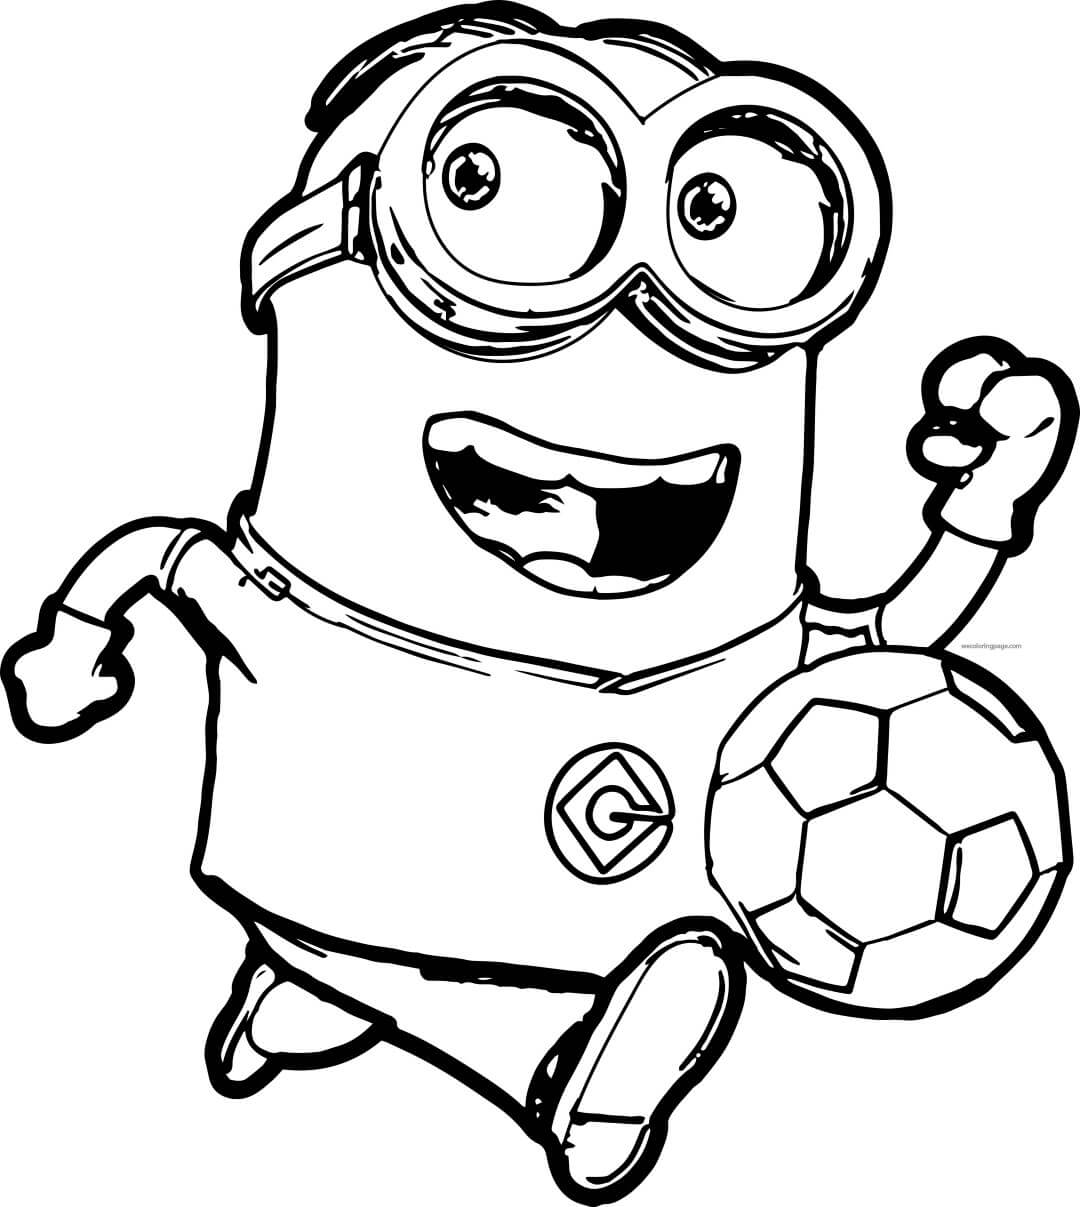 Minions Coloring Pages - Soccer